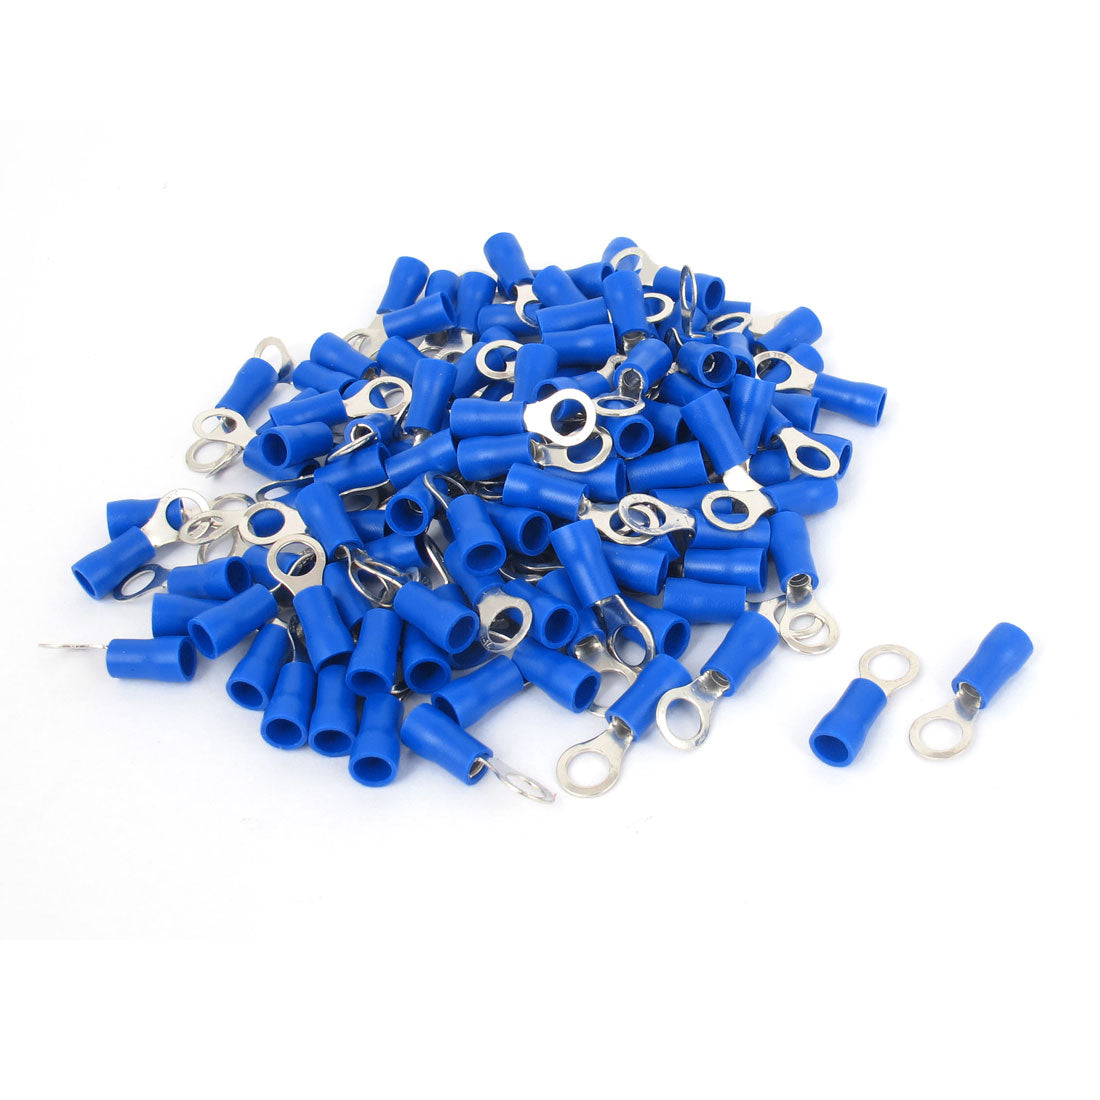 uxcell Uxcell 120pcs Blue RVS2-5 16-14 AWG Gauge Crimp Style Car Power Wire Ring Terminals